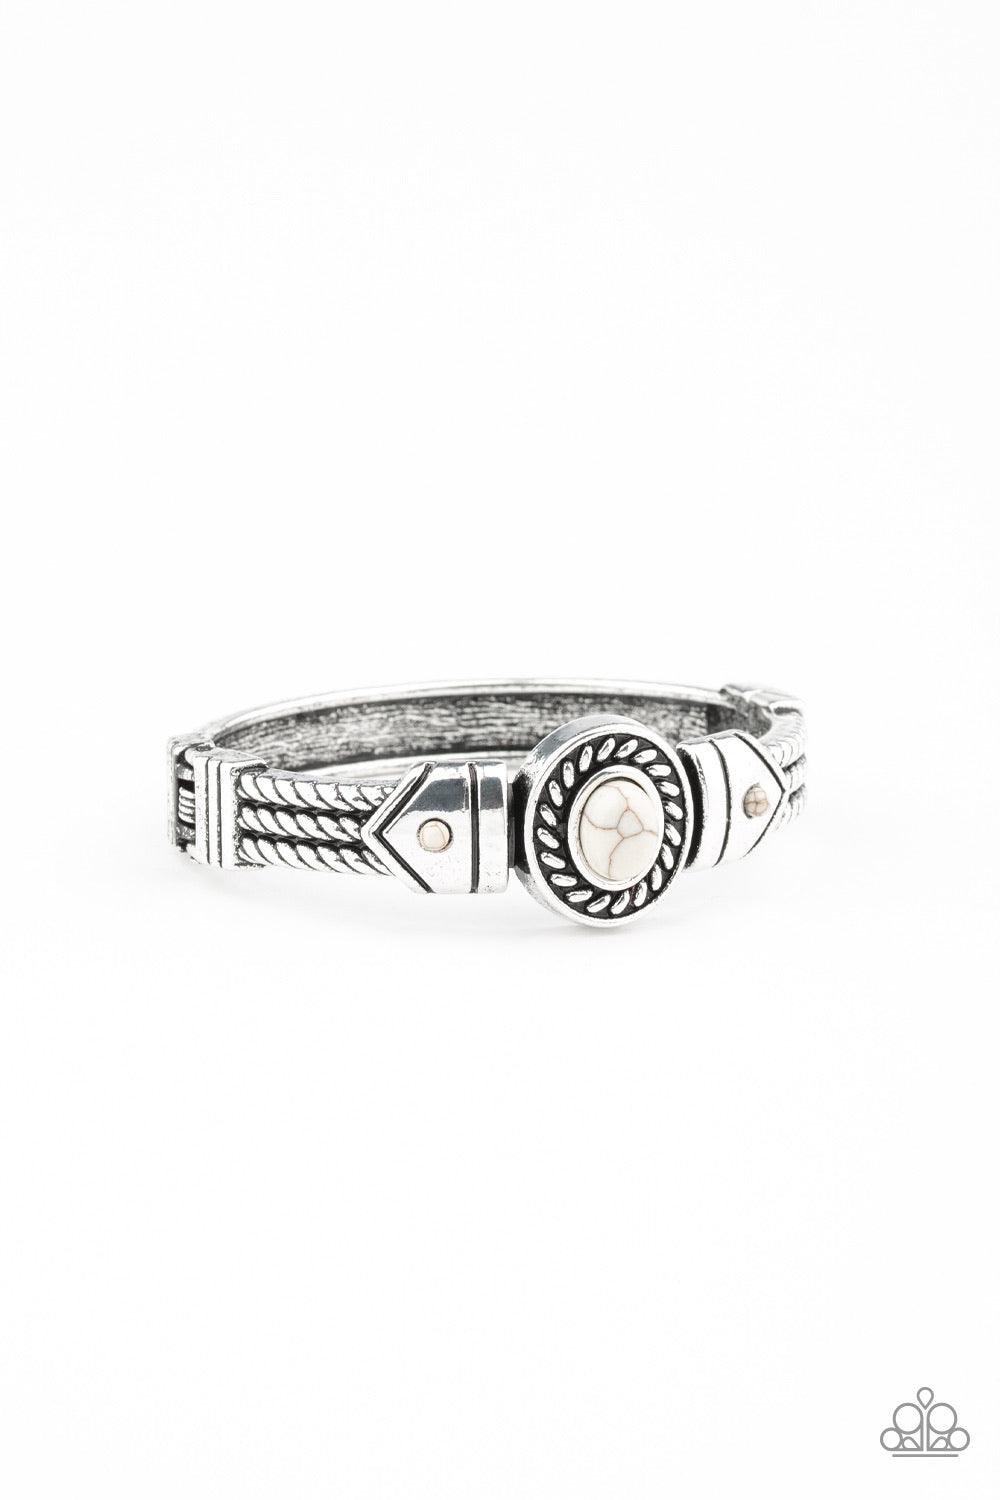 Paparazzi Accessories Tribal Soul ~White Featuring metallic rope-like patterns, an ornate bangle-like cuff curls around the wrist. Refreshing white stones dot the center of the ornate frame for a seasonal flair. Features a hinged closure. Jewelry